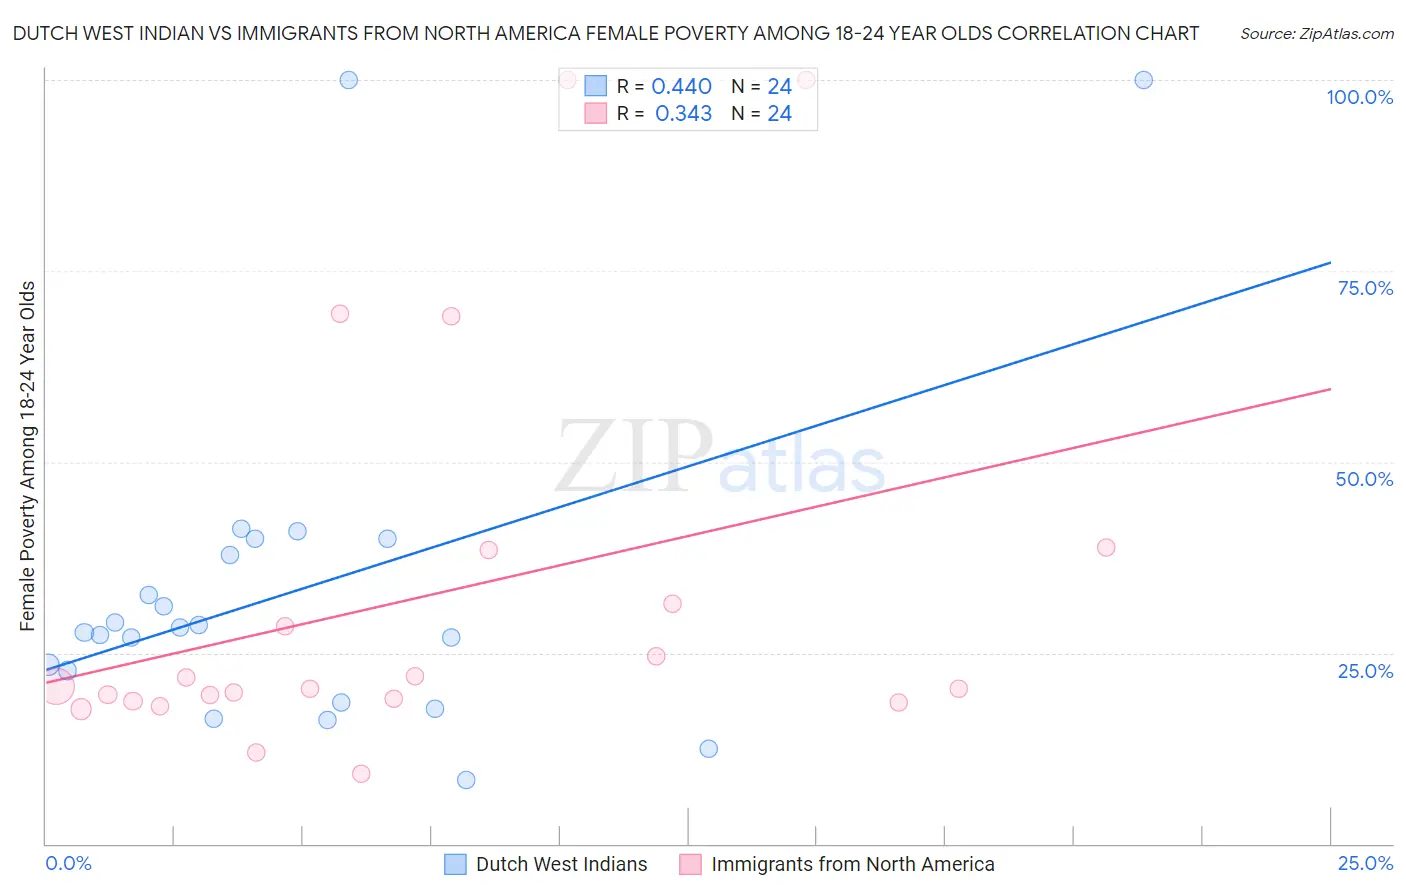 Dutch West Indian vs Immigrants from North America Female Poverty Among 18-24 Year Olds